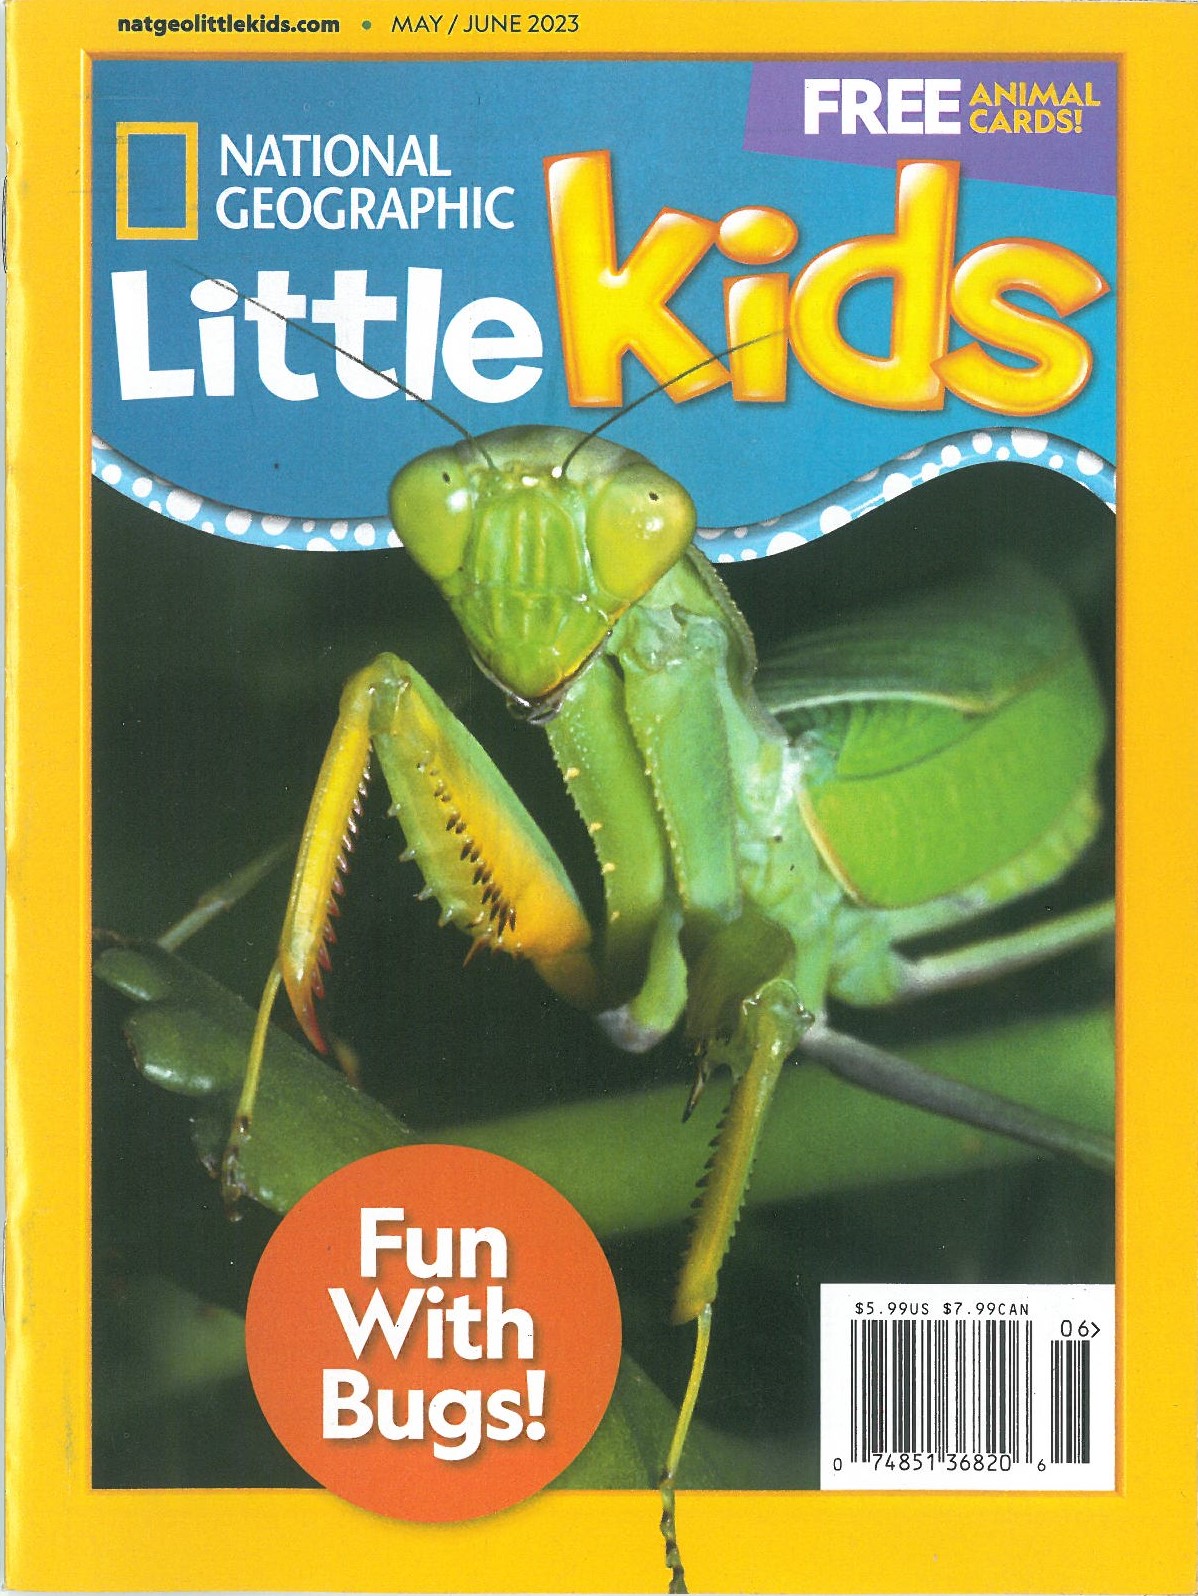 NATIONAL GEOGRAPHIC LITTLE KIDS ISSUE OF MAY/JUNE 2022